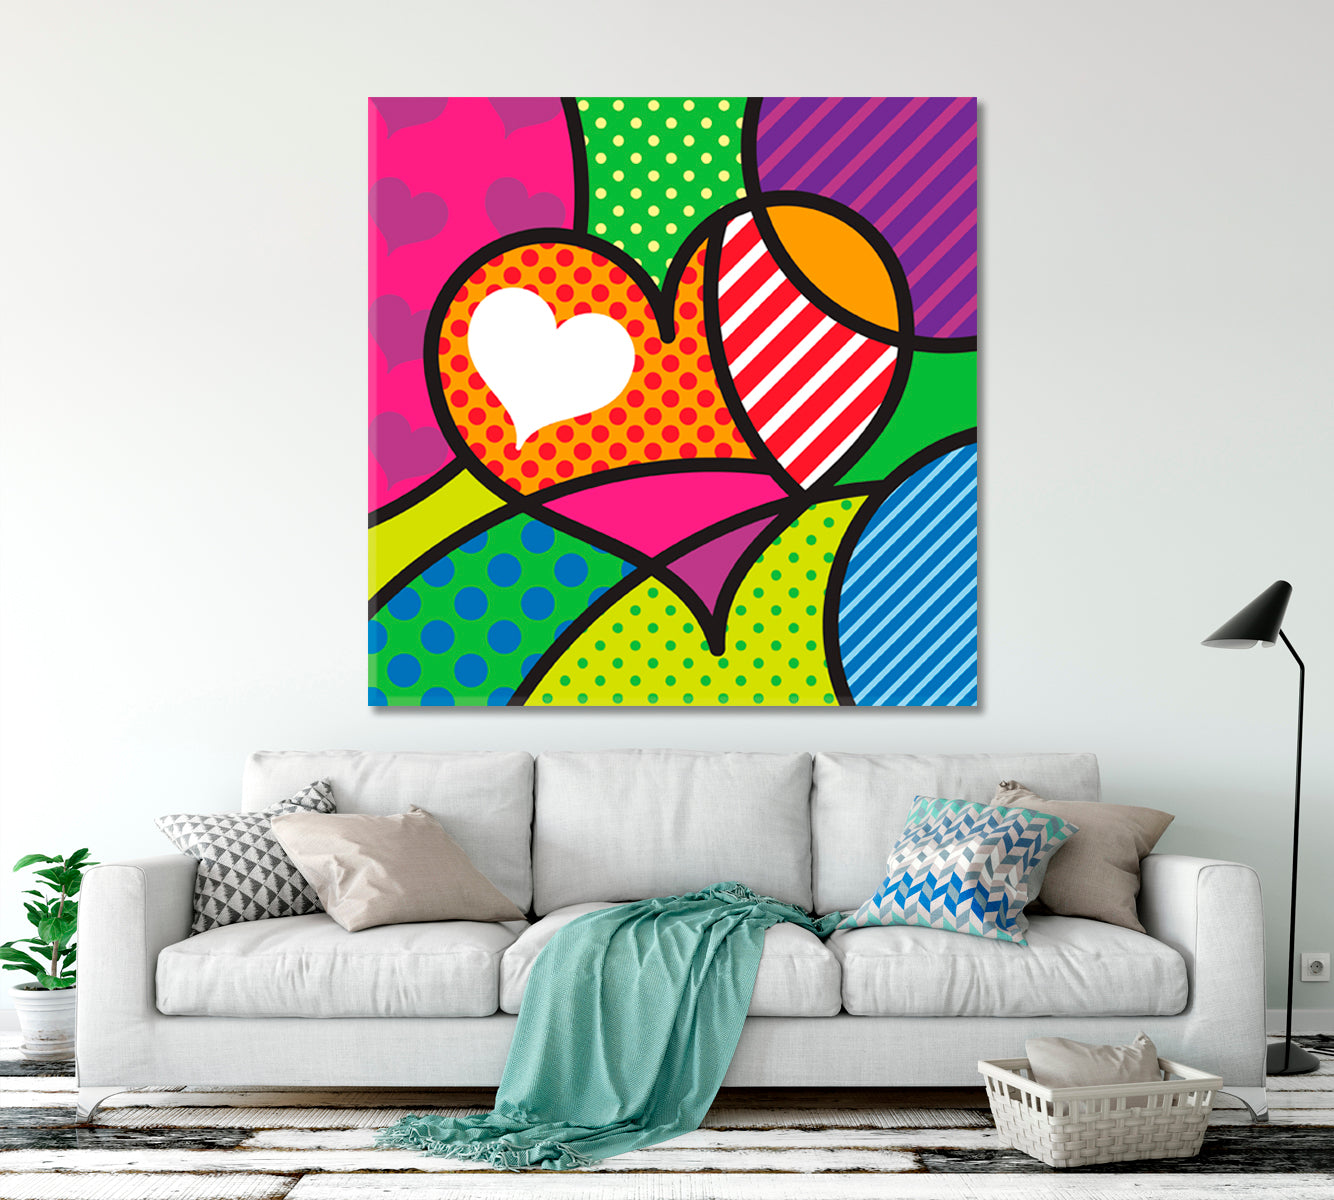 Colorful Modern Abstract Print on Canvas with Kiss Emoji | Artwork Print  for Sale | Ron Deri Art